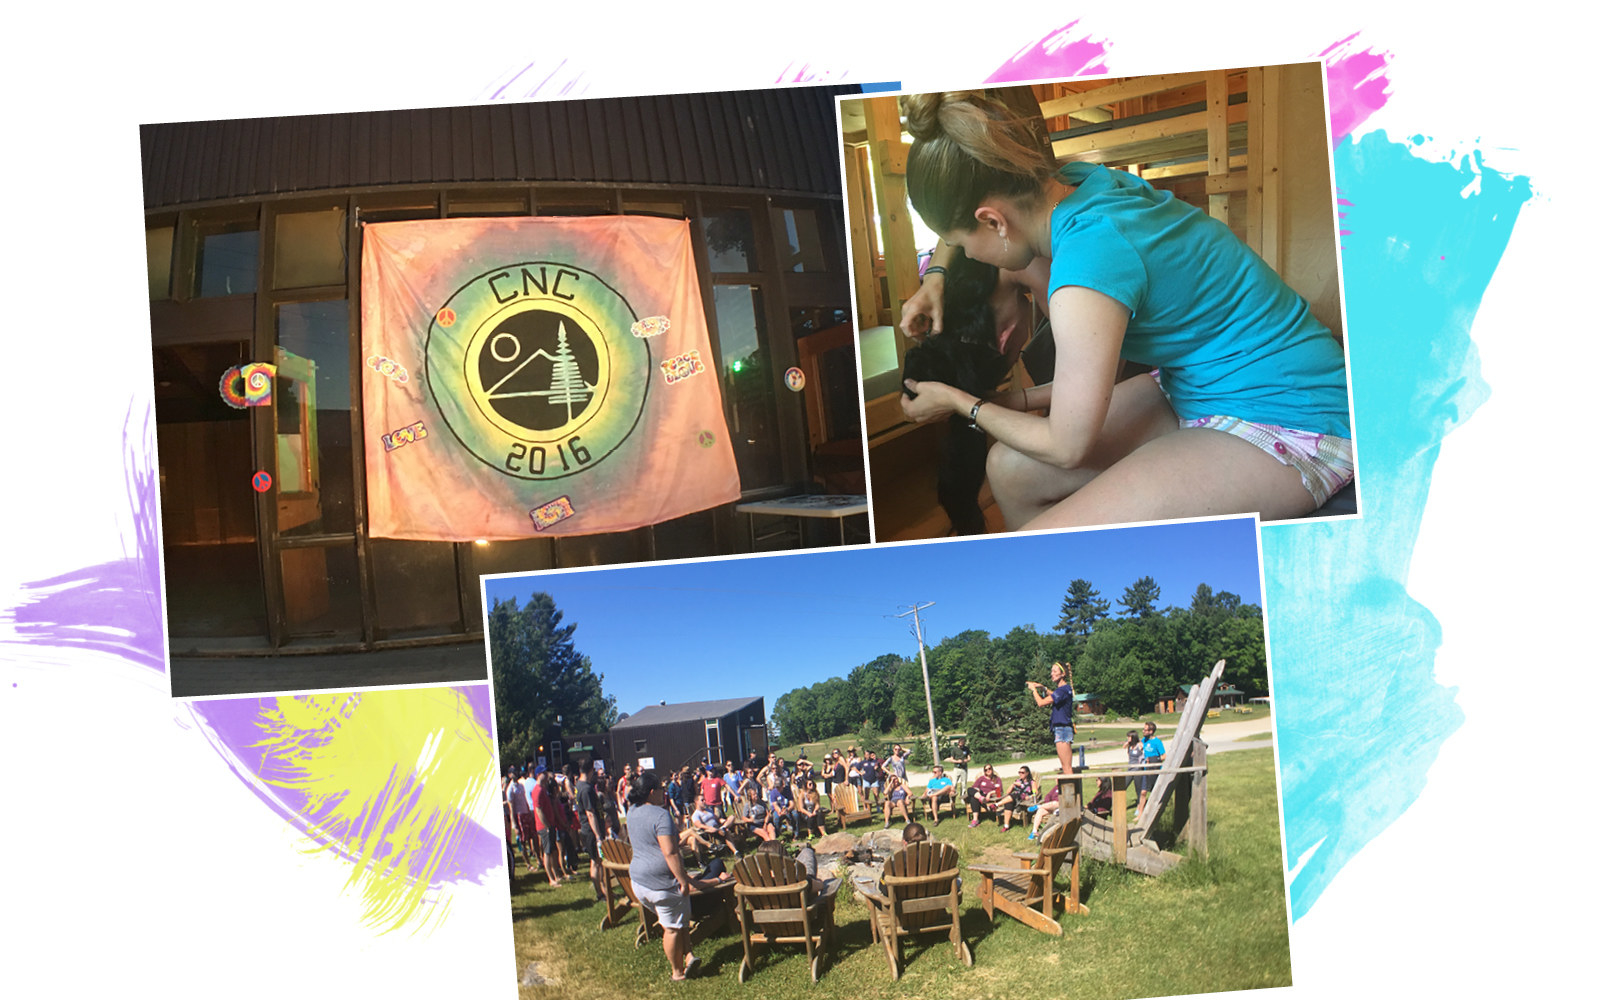 I Went To A Summer Camp For Adults And It Was Weird